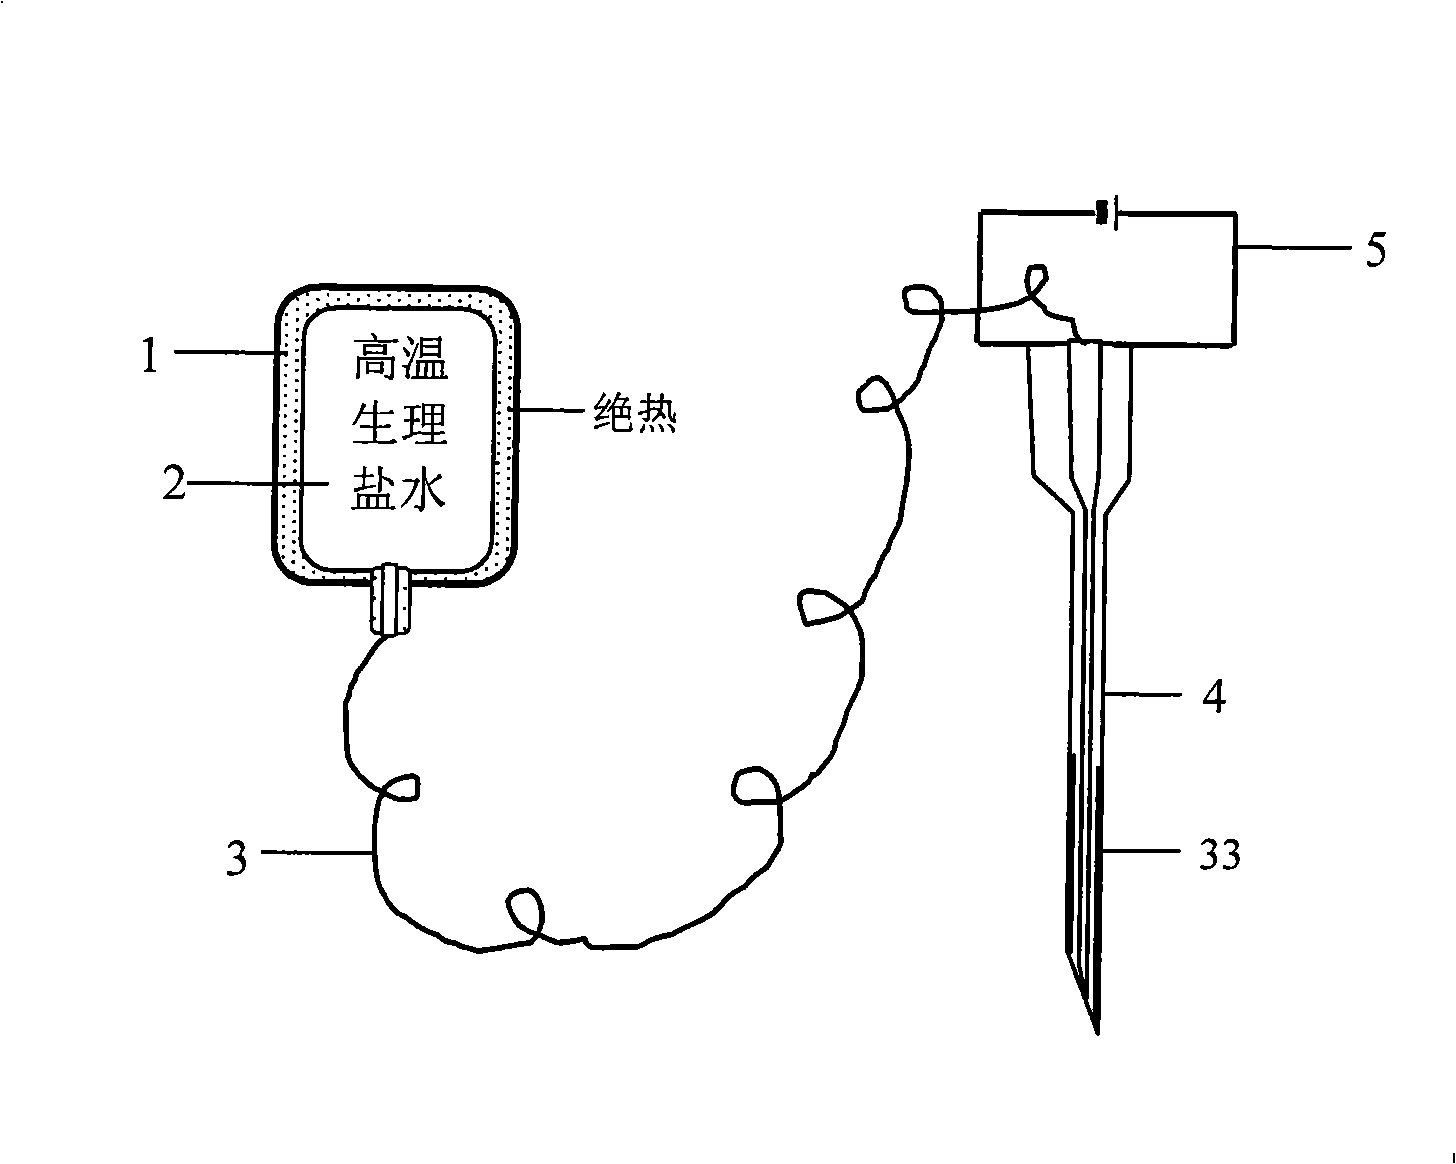 Intra-arterial heating infusion set and method